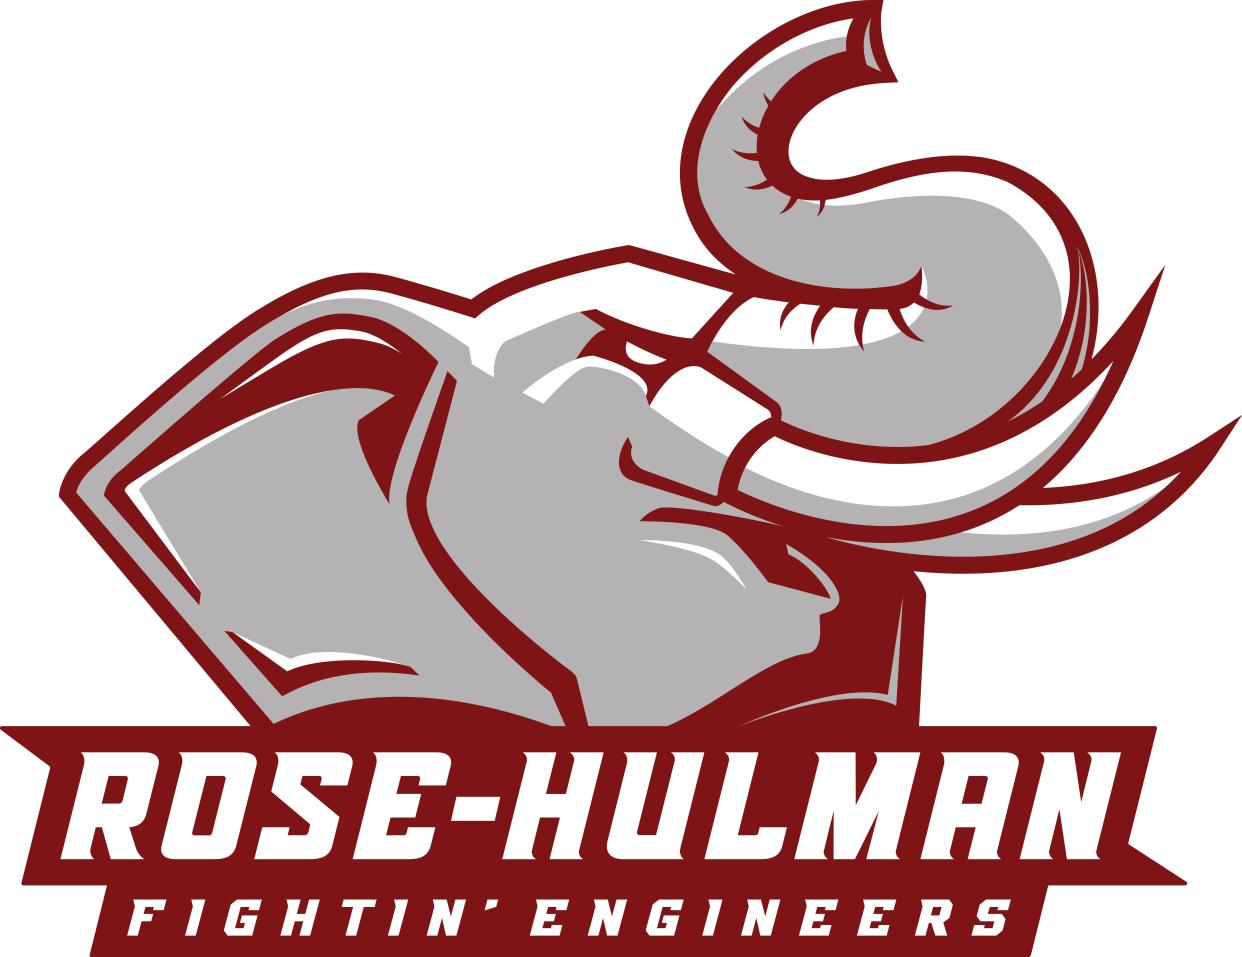 The Rose-Hulman 2022-2023 women's basketball season was canceled after just five games due to low roster numbers.